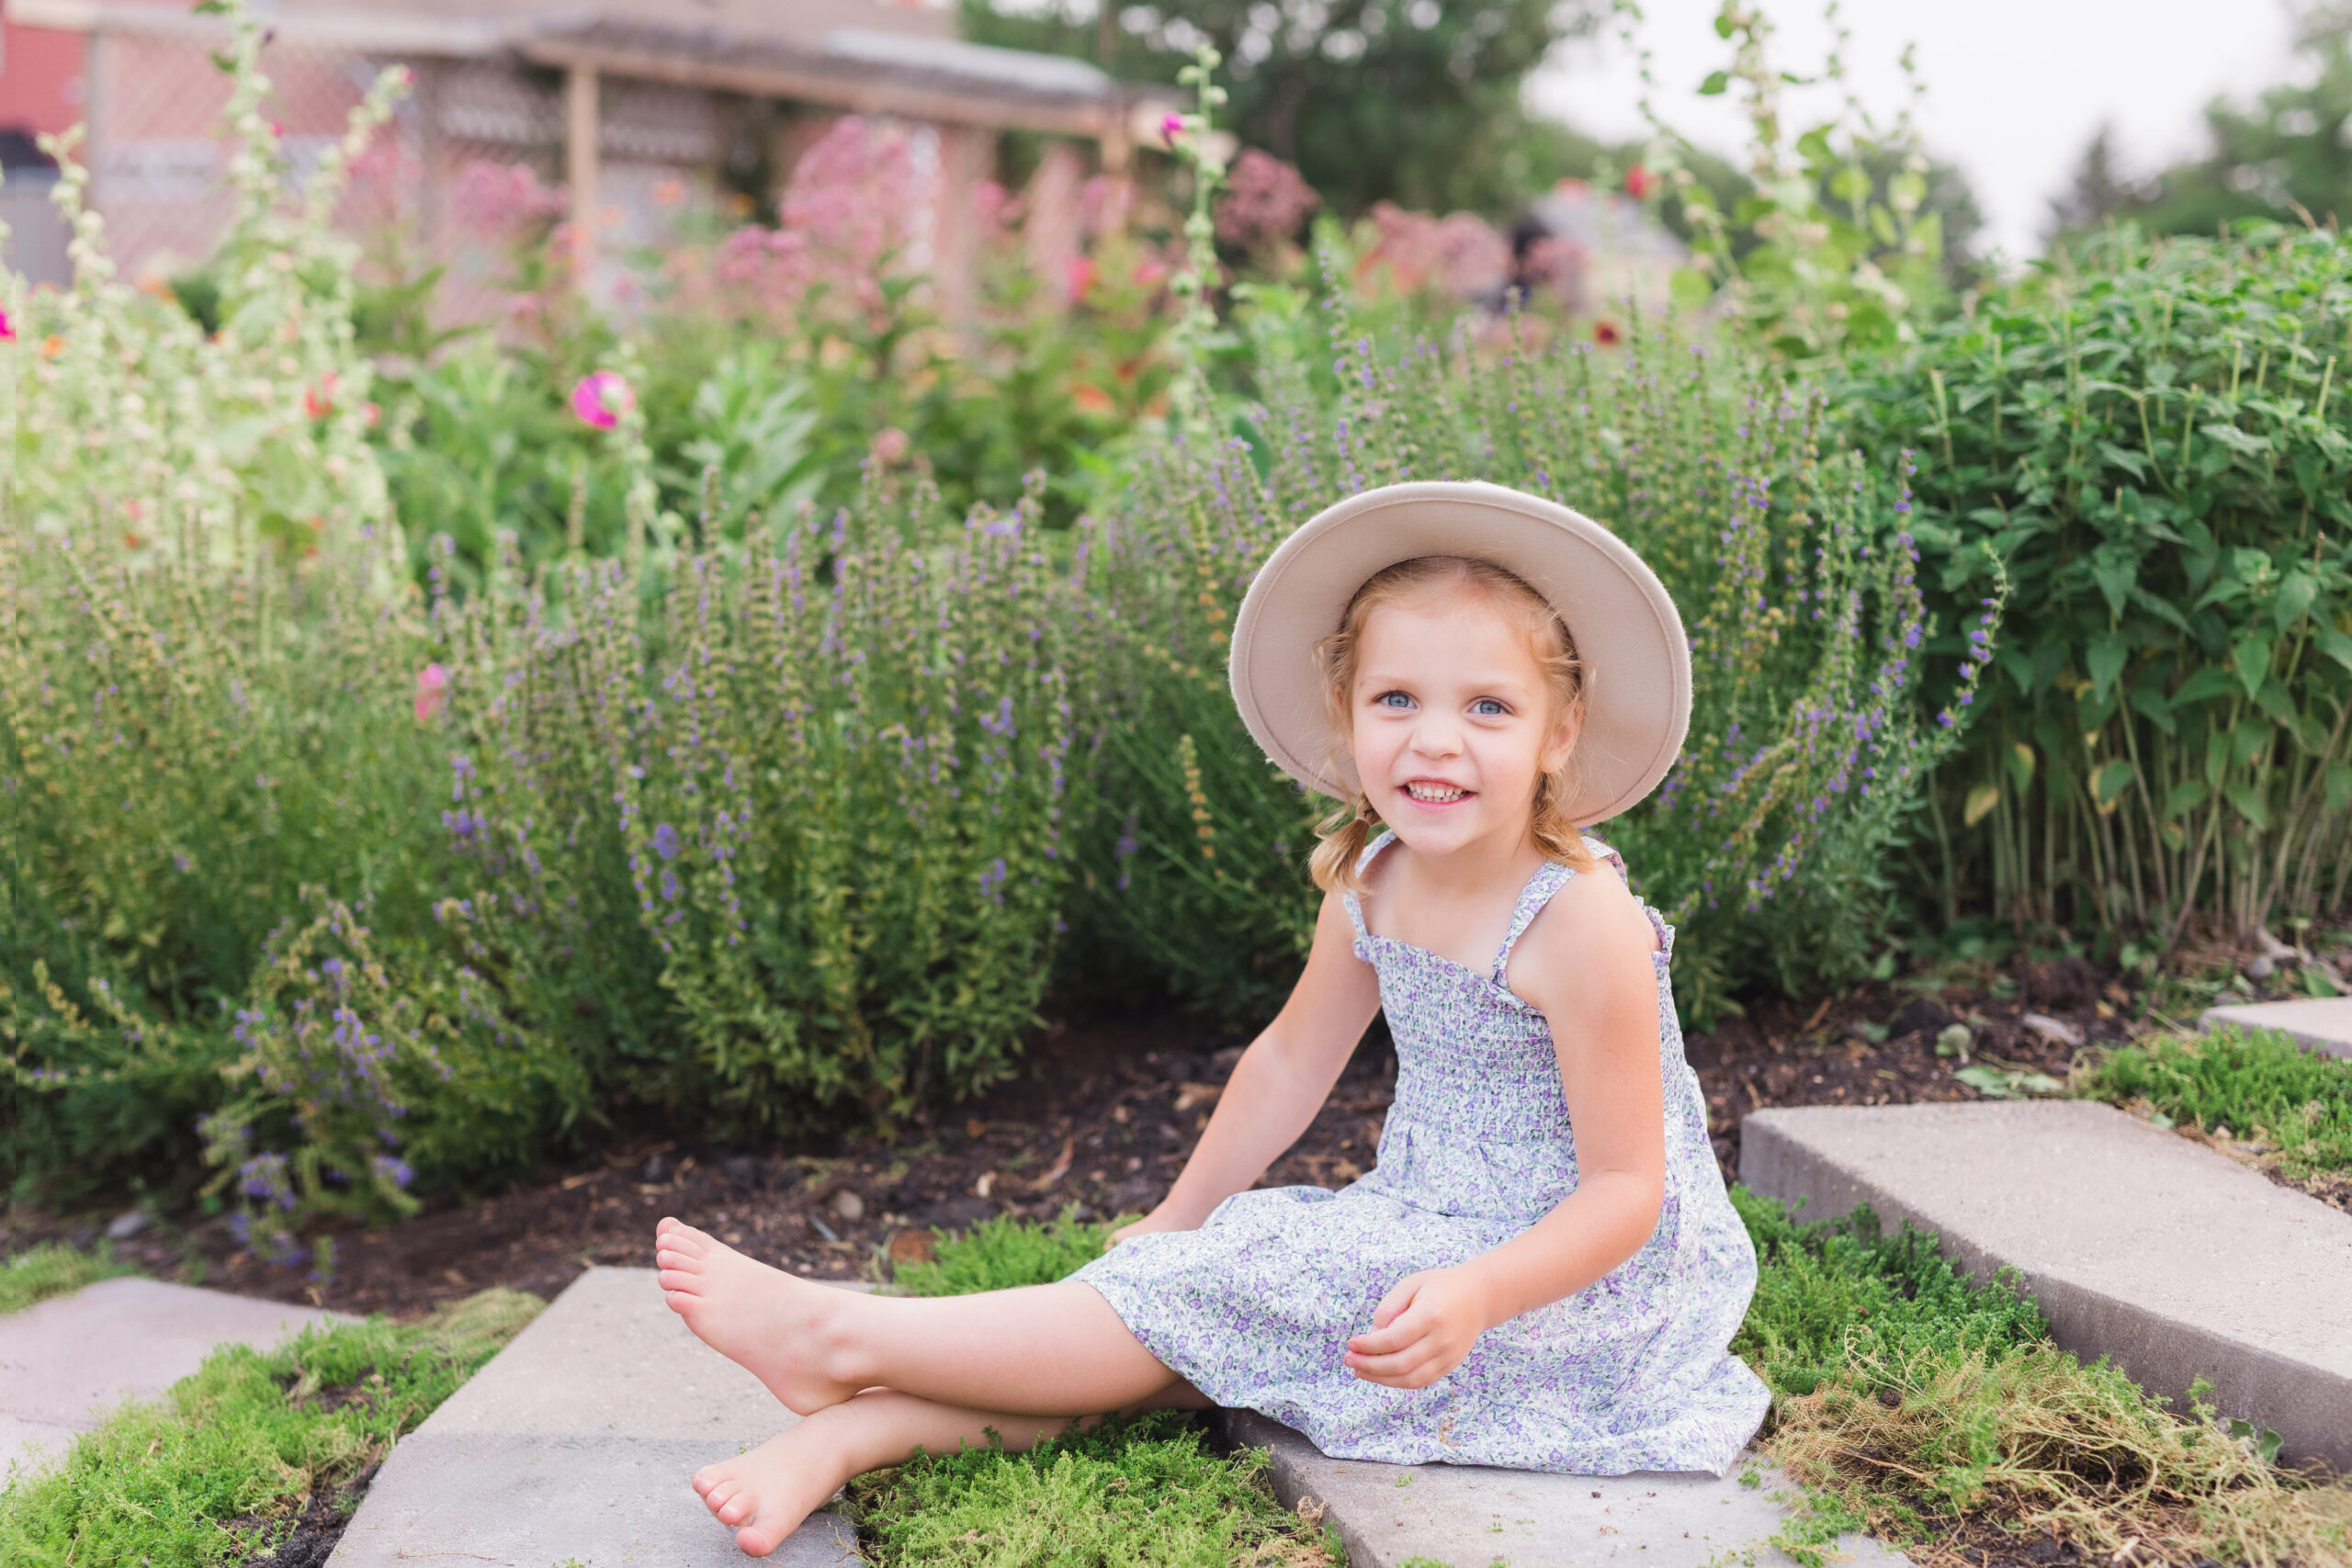 A young girl with a beaming smile, sitting in a lush garden, wearing a summer dress and a hat.